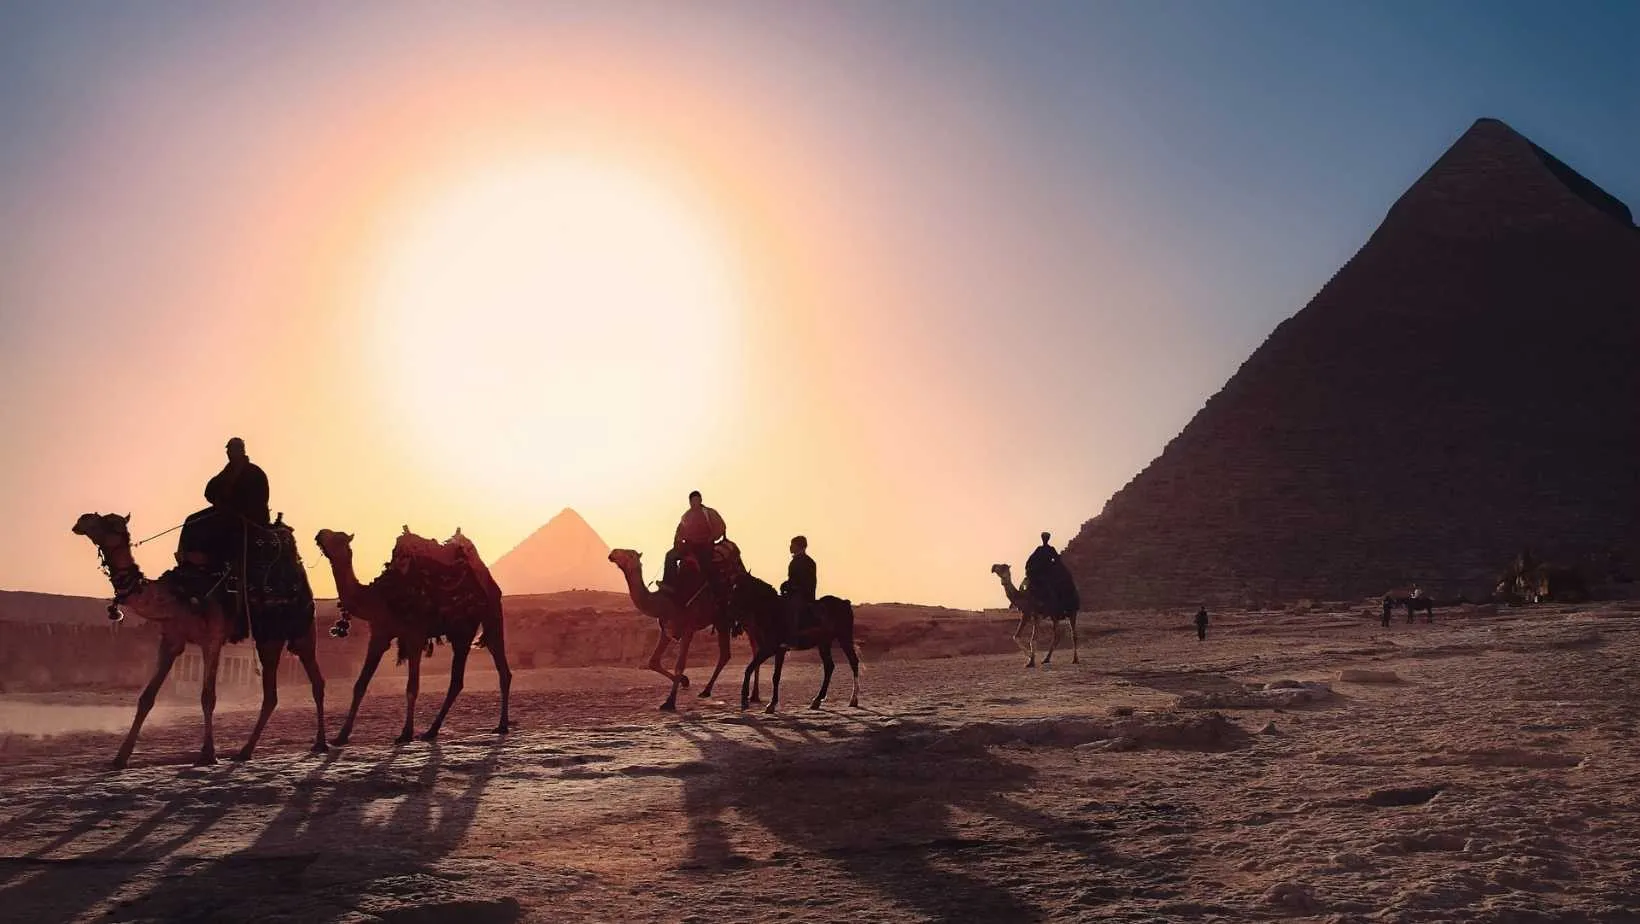 When is the best time to visit Egypt?